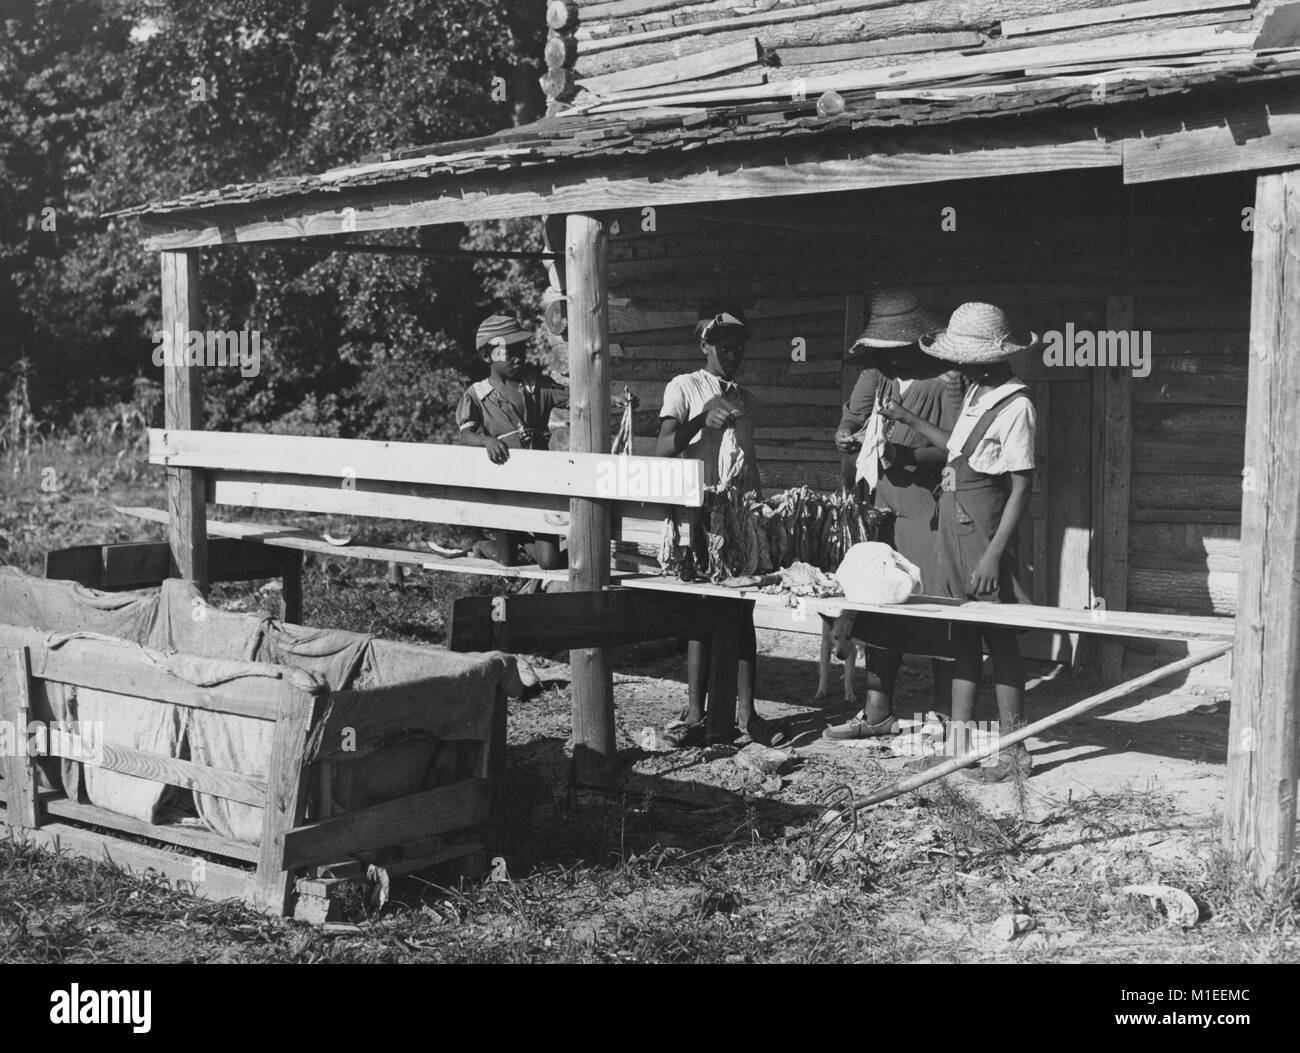 African-American family working at tobacco harvest on porch of wooden hut, manning, Clarendon County, South Carolina, USA, 1940. From the New York Public Library. () Stock Photo